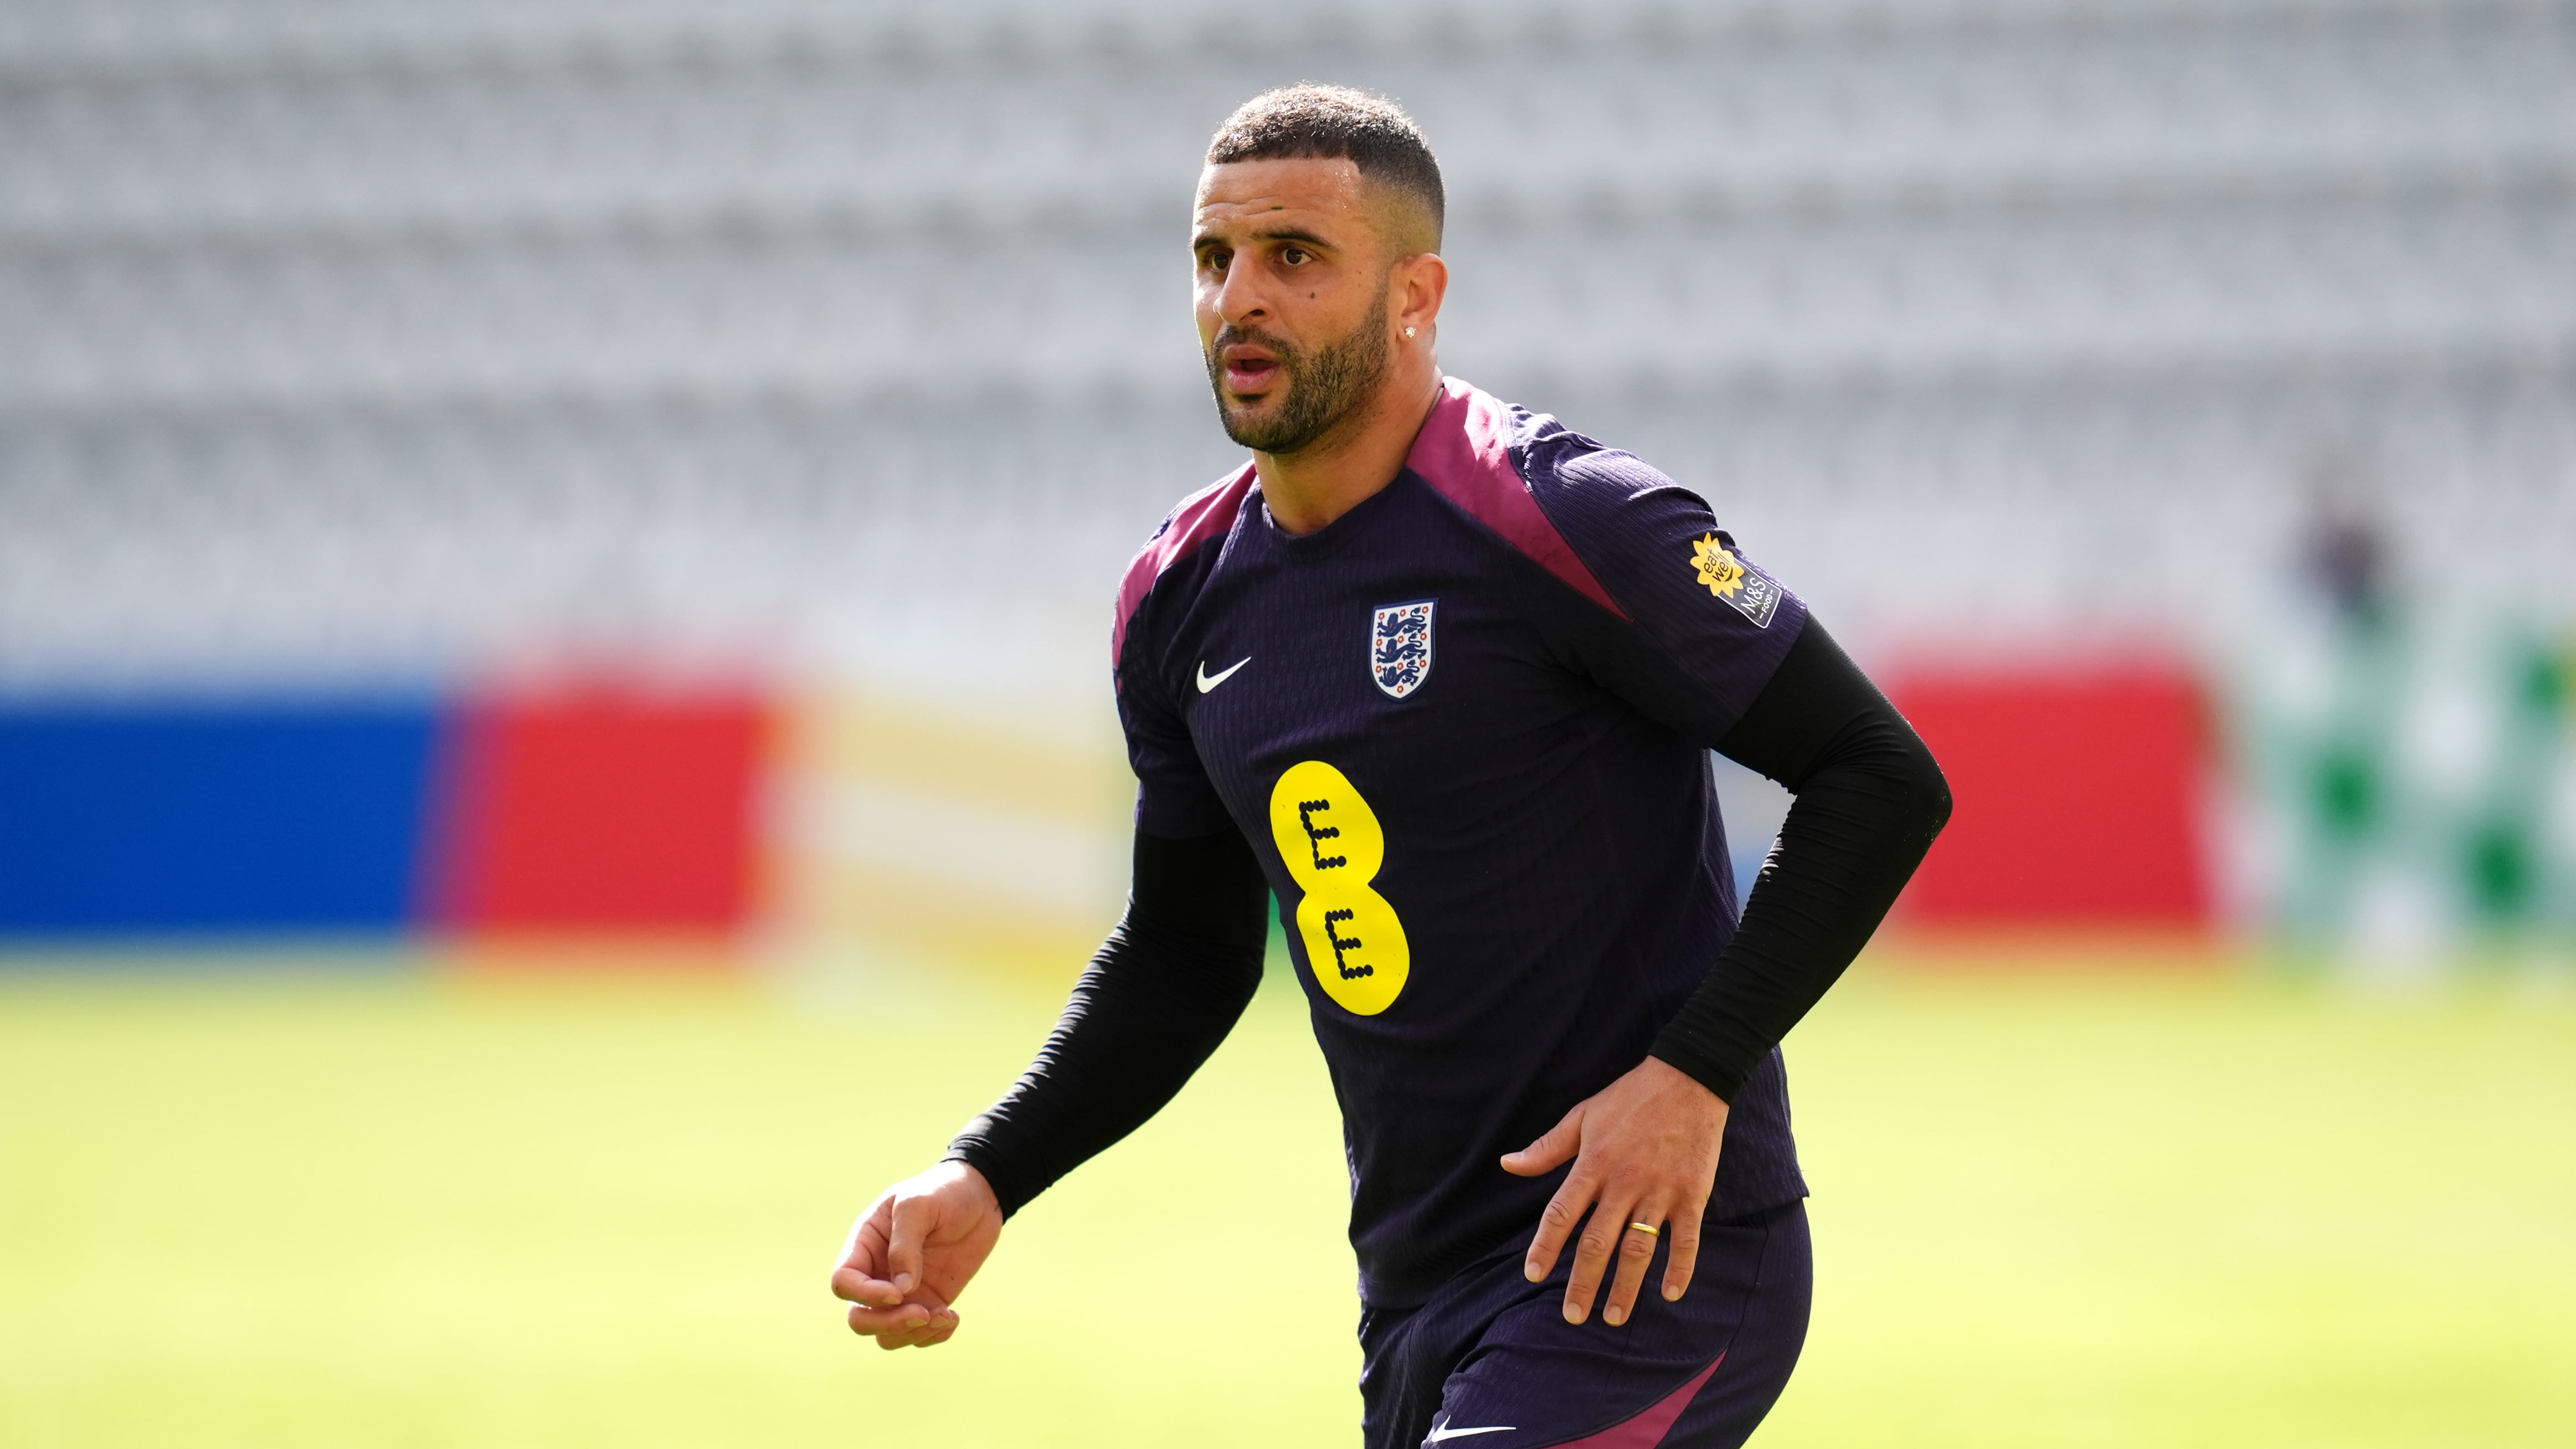 Kyle Walker has been selected as England’s vice-captain